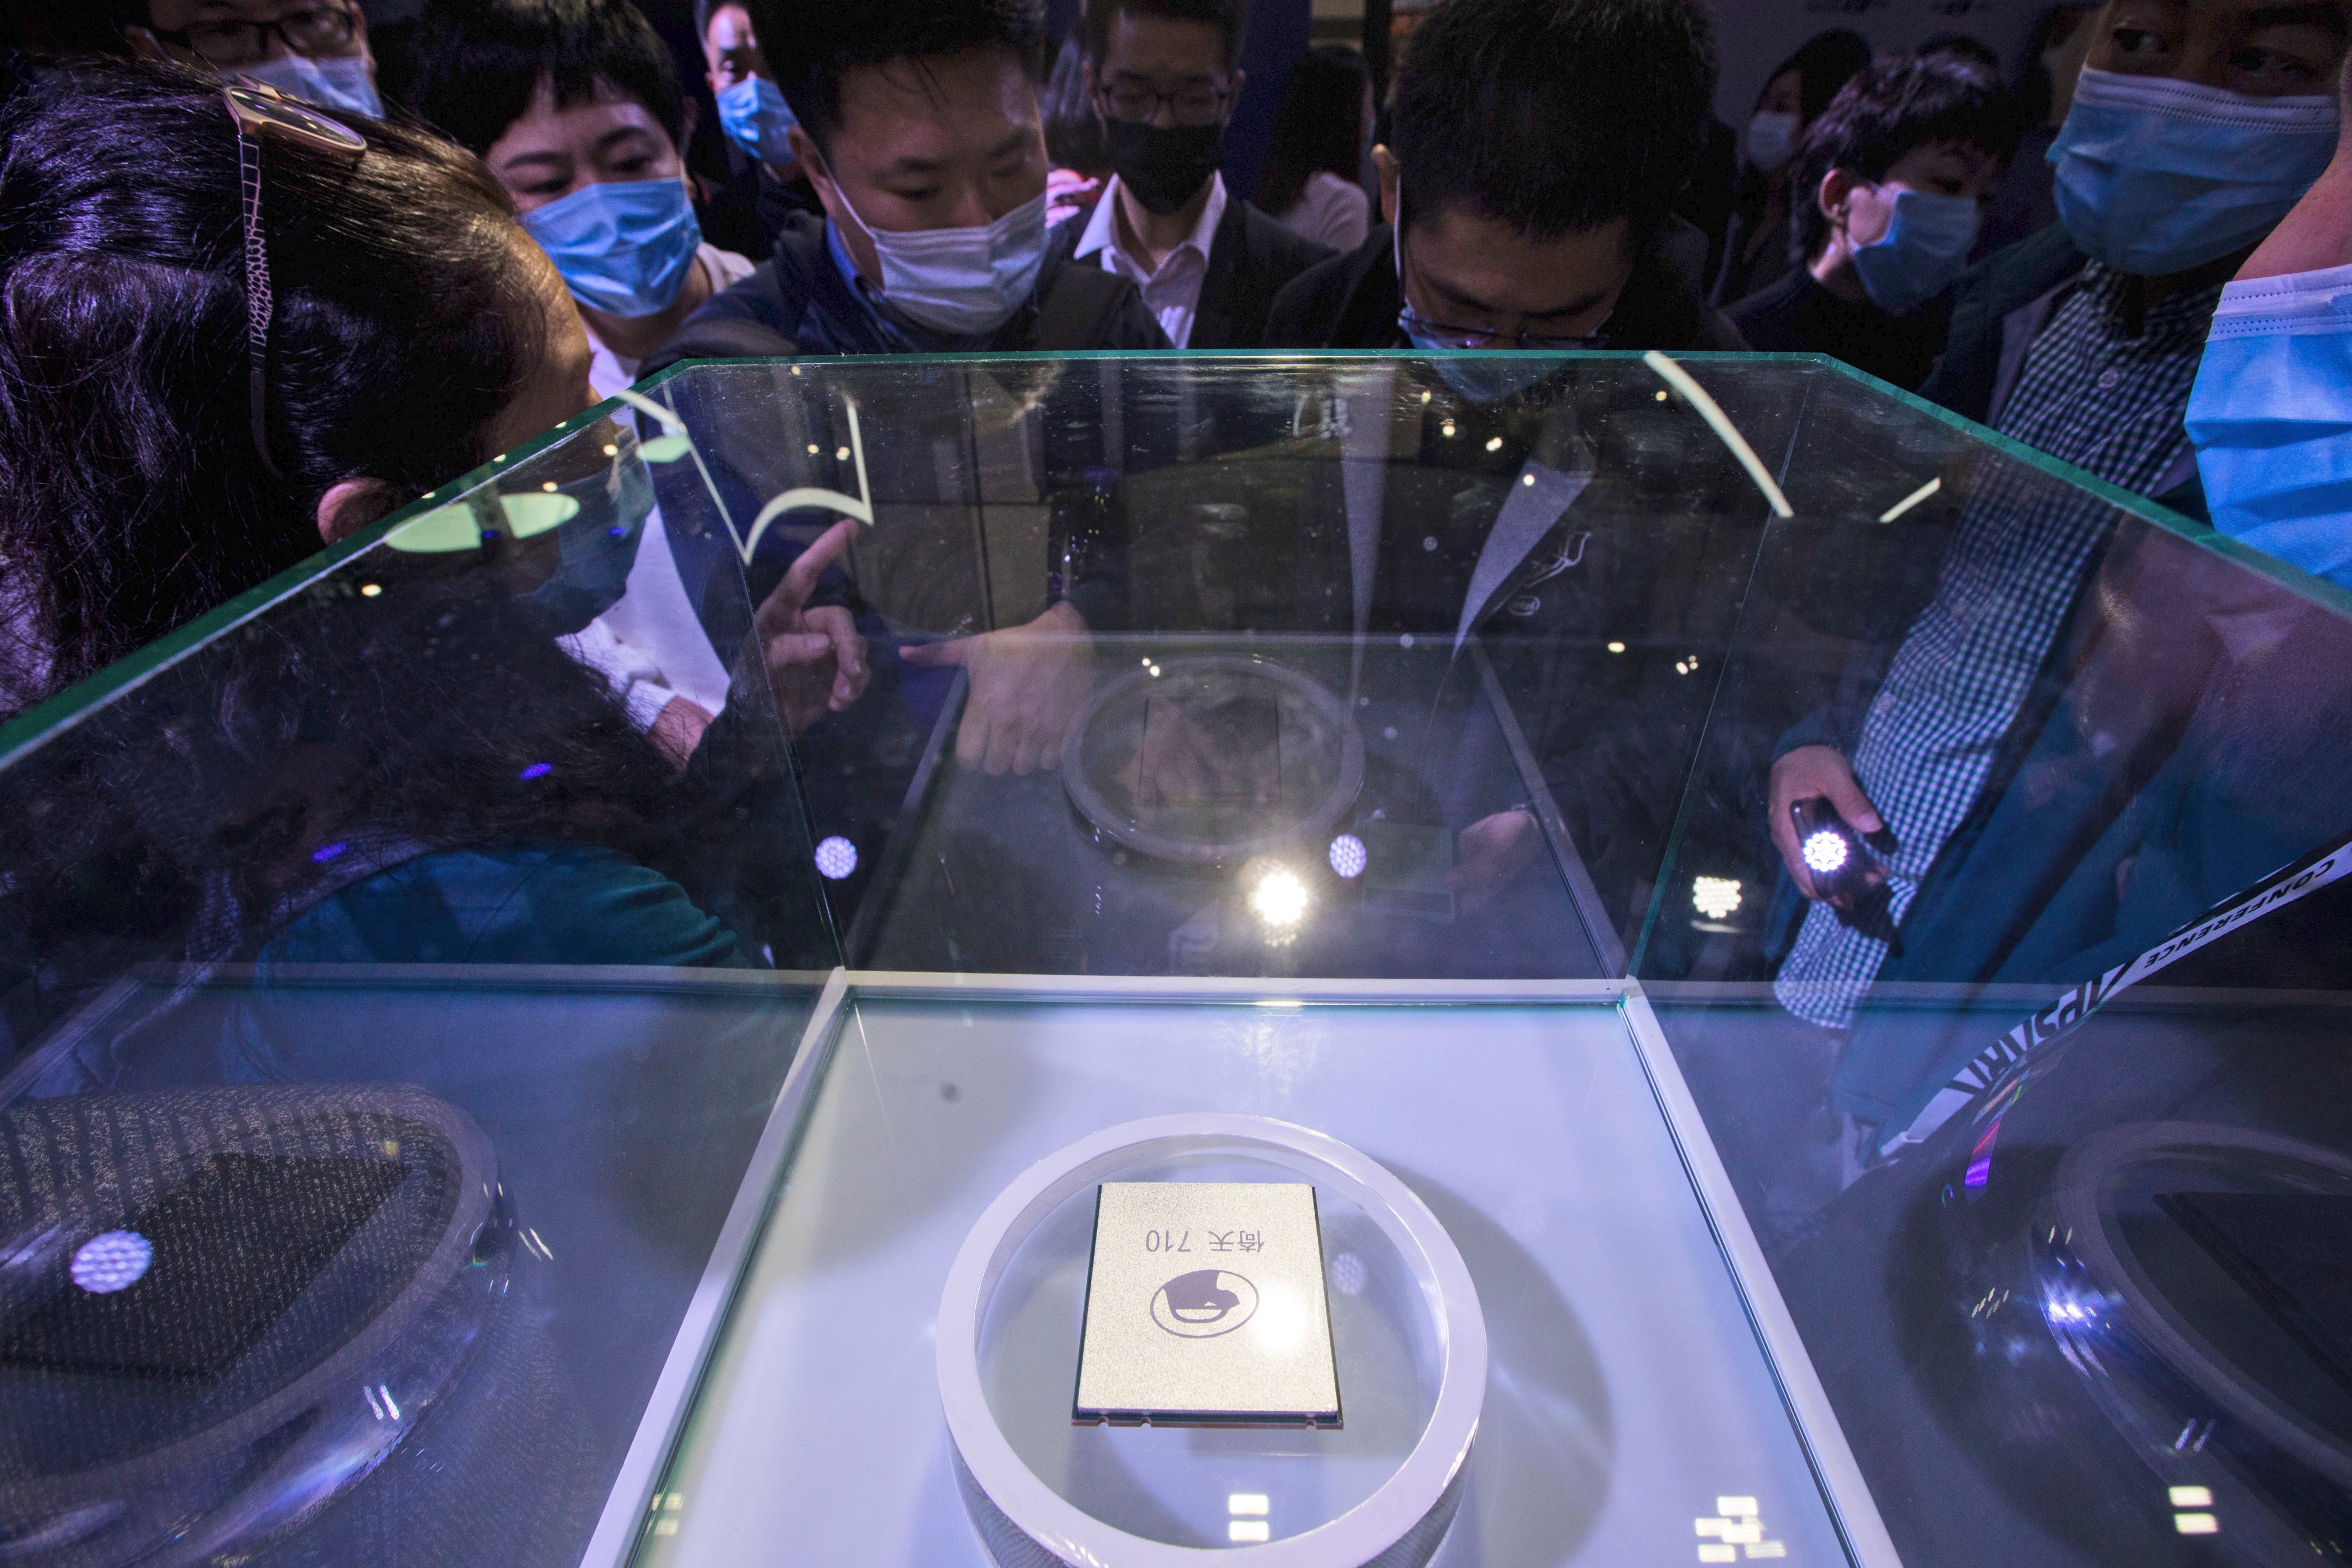 Visitors look at the Arm-based Yitian 710 server processor, developed by Alibaba’s T-Head unit, at the Apsara Conference, in Hangzhou, Zhejiang province, Oct. 19, 2021. Photo: Chinatopix via AP